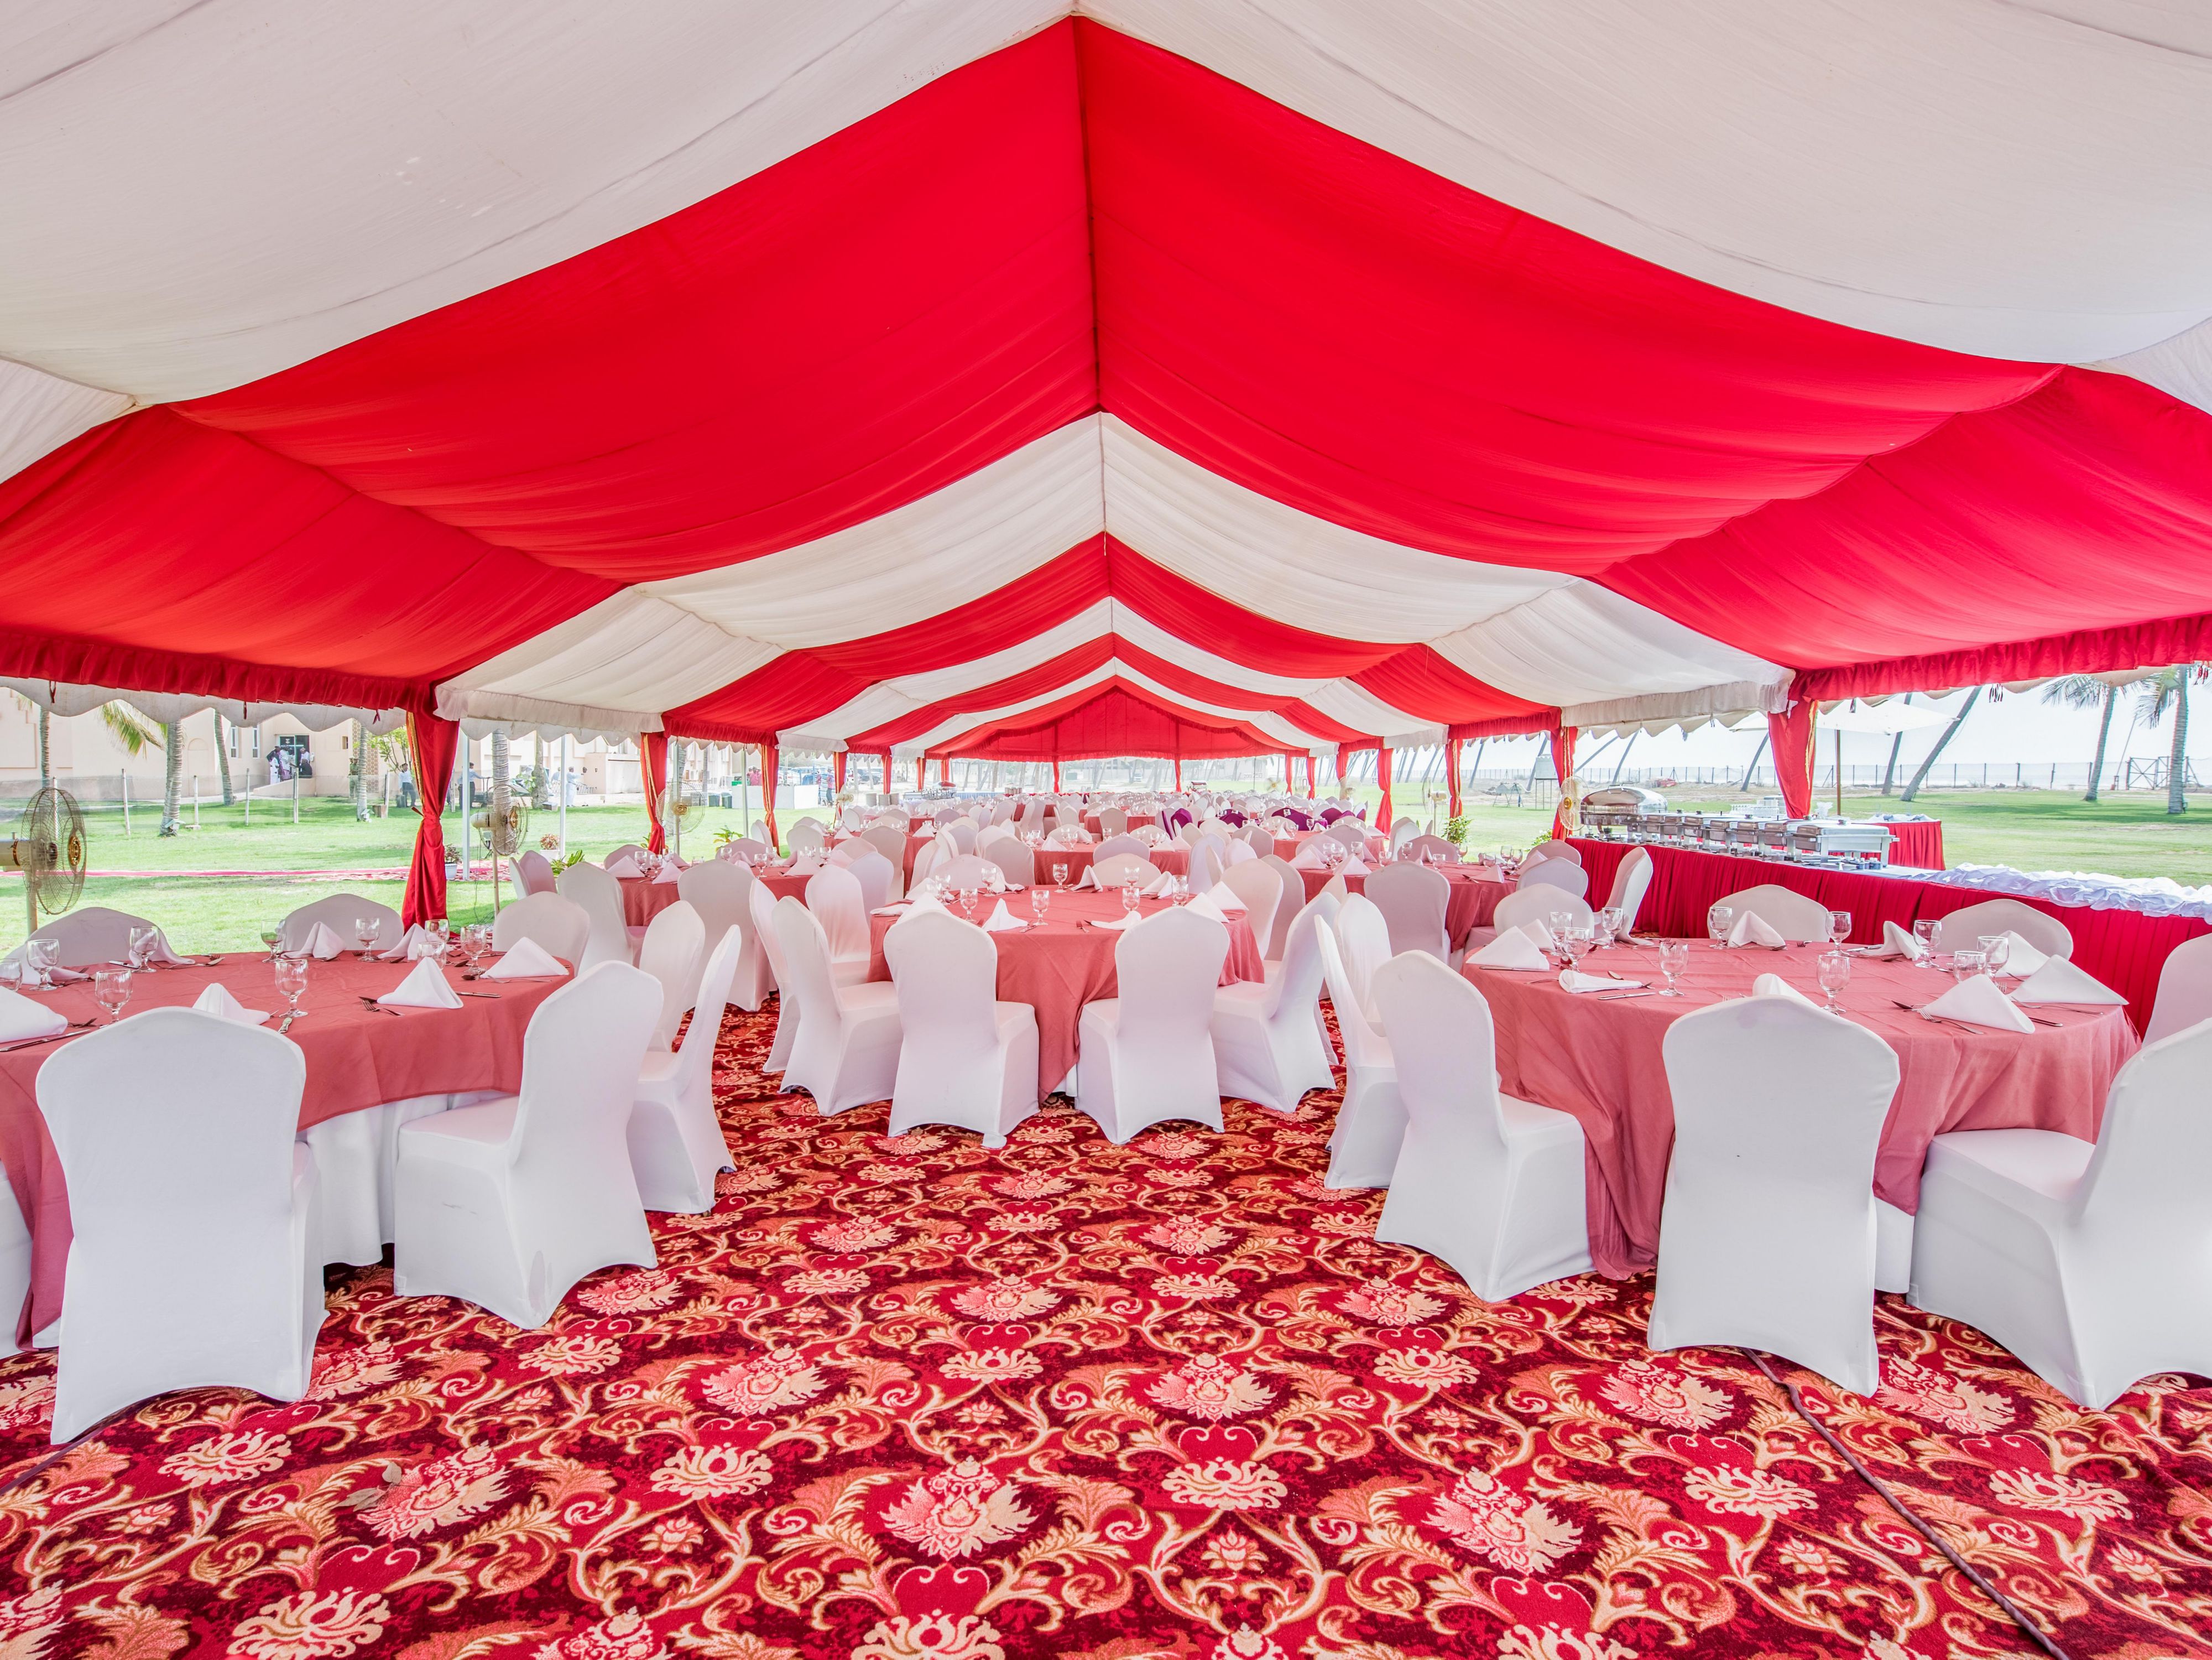 Our beautiful outdoor spaces provide a picturesque backdrop for your event, while our expert staff ensure every detail is taken care of. With elegant accommodations and delicious catering, let us make your event a reality.